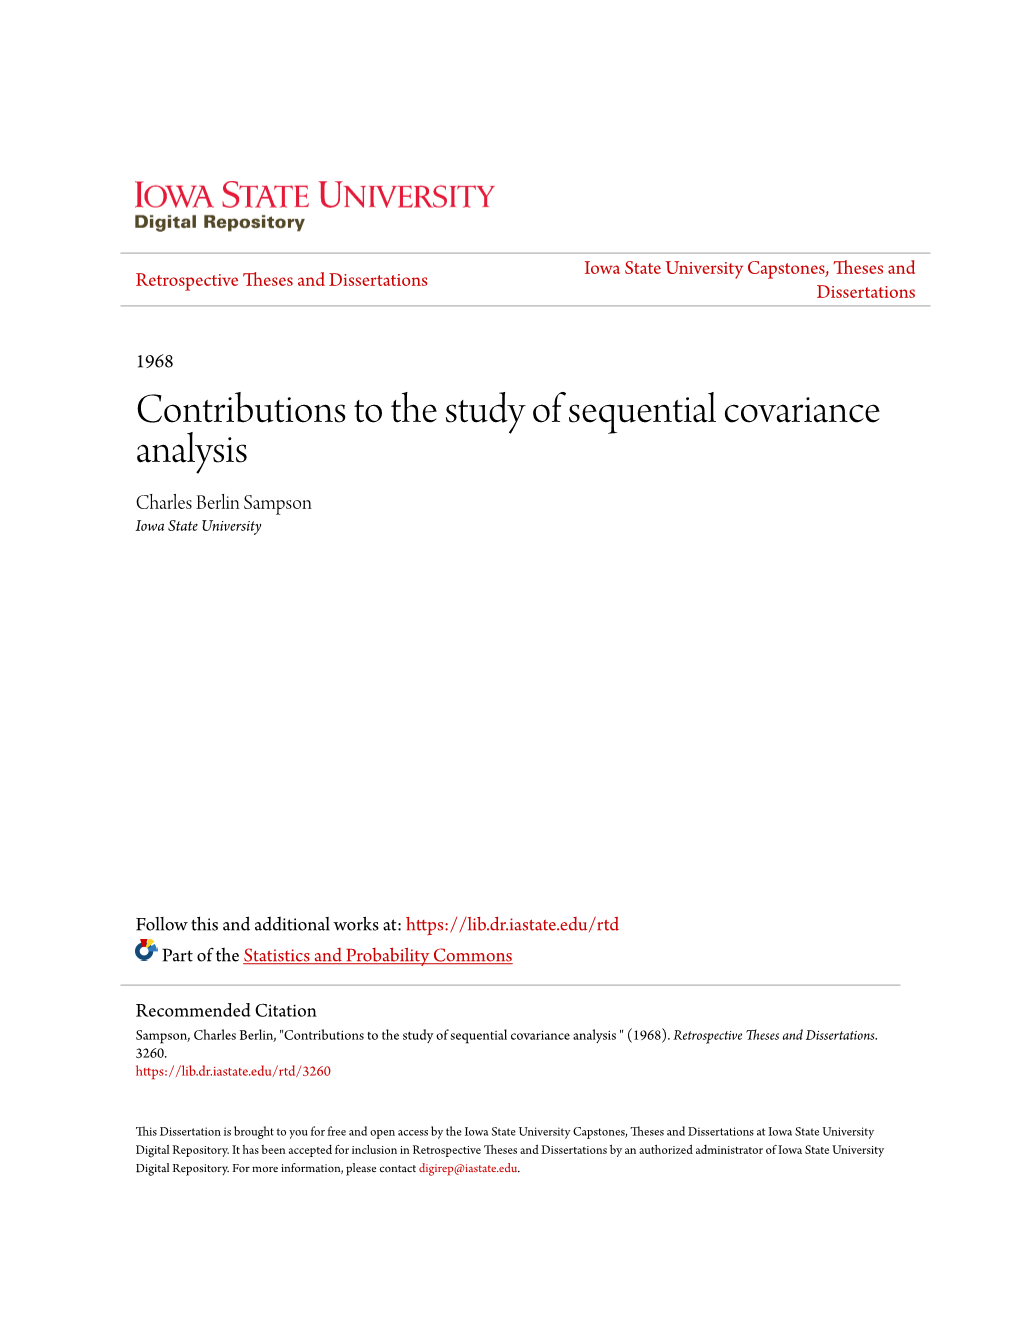 Contributions to the Study of Sequential Covariance Analysis Charles Berlin Sampson Iowa State University